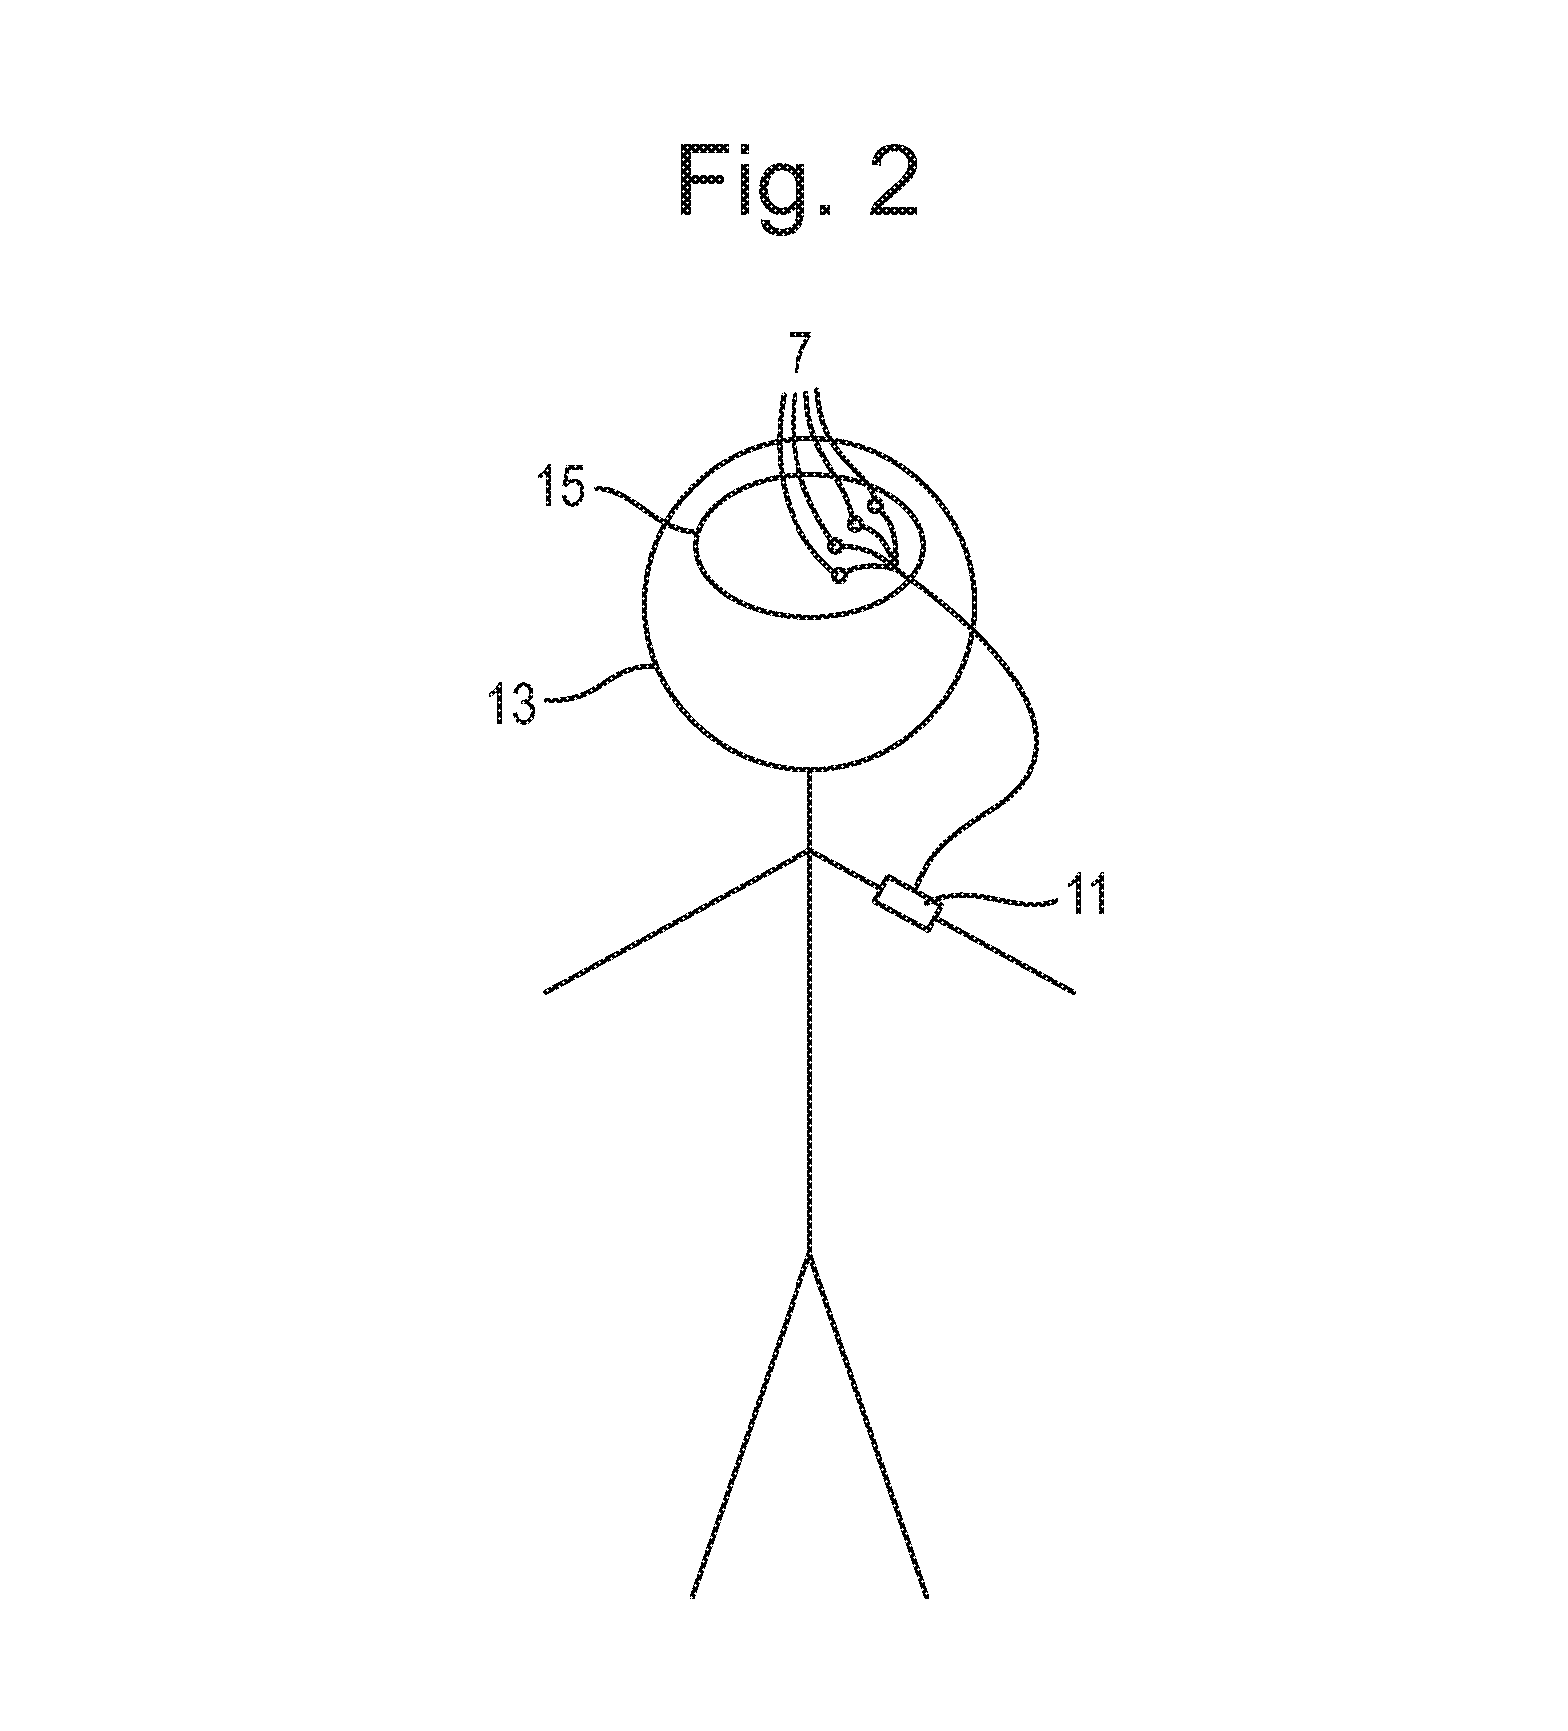 drawing of a stick man with 3 electodes implanted in brain, and external wire to a box on its arm.